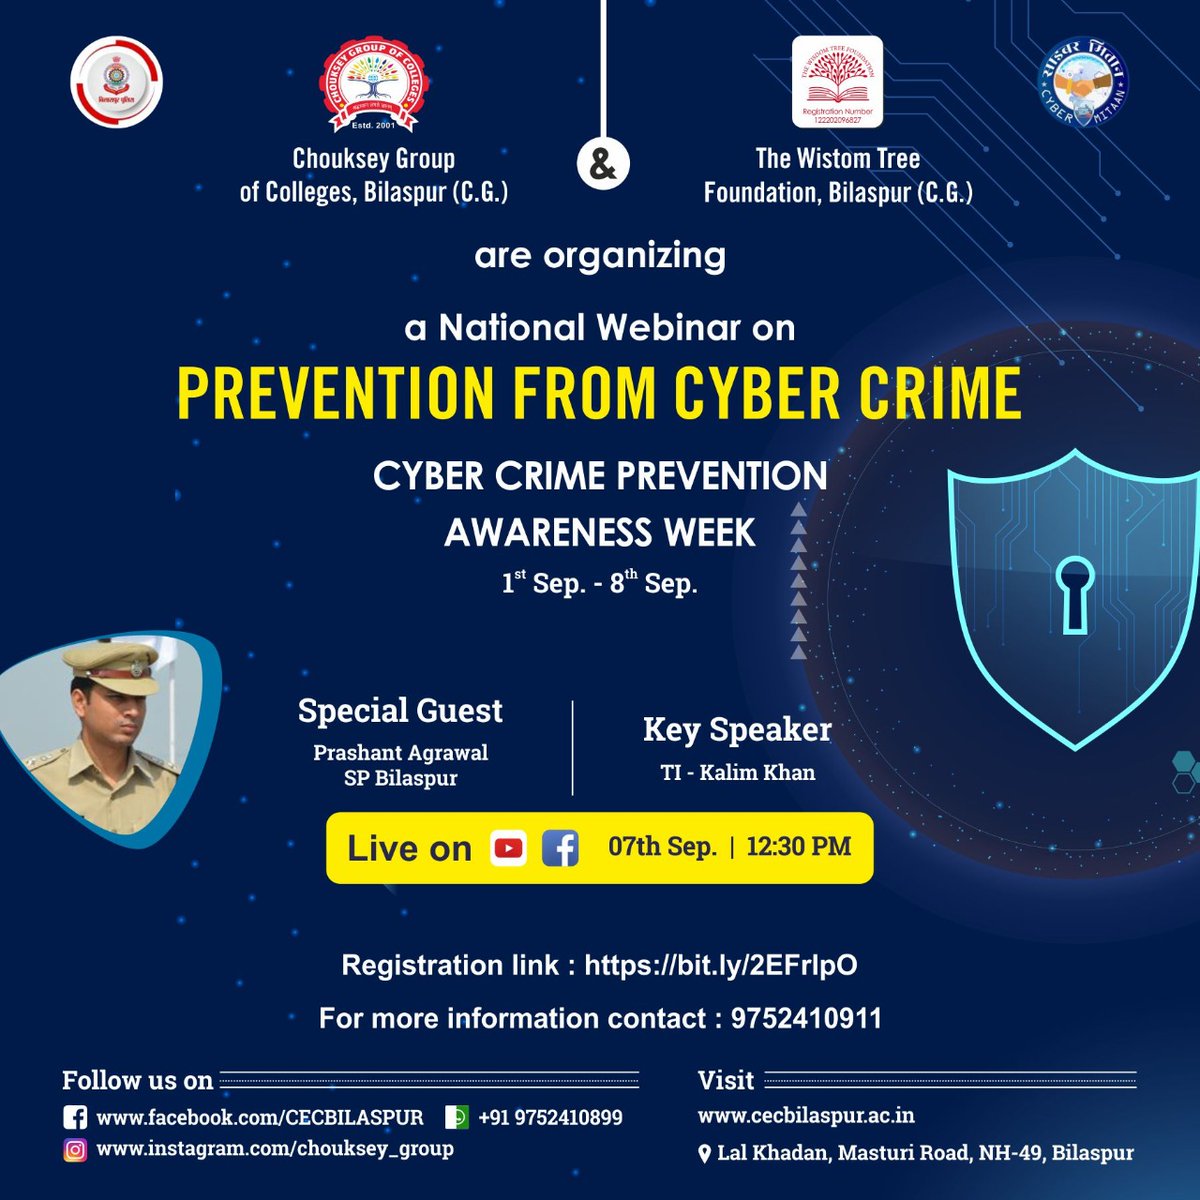 Chouksey Group of Colleges* , Bilaspur in  association with *Wisdom Tree Foundation* and *Bilaspur Police* . 
🔸Registration link
bit.ly/2EFrlpO
 #CyberCrimeAwareness
#BilaspurPolice  #ChhattisgarhPolice #ChoukseyGroupofcolleges #BilaspurSmartCity #Bilaspur #Chhattisgarh